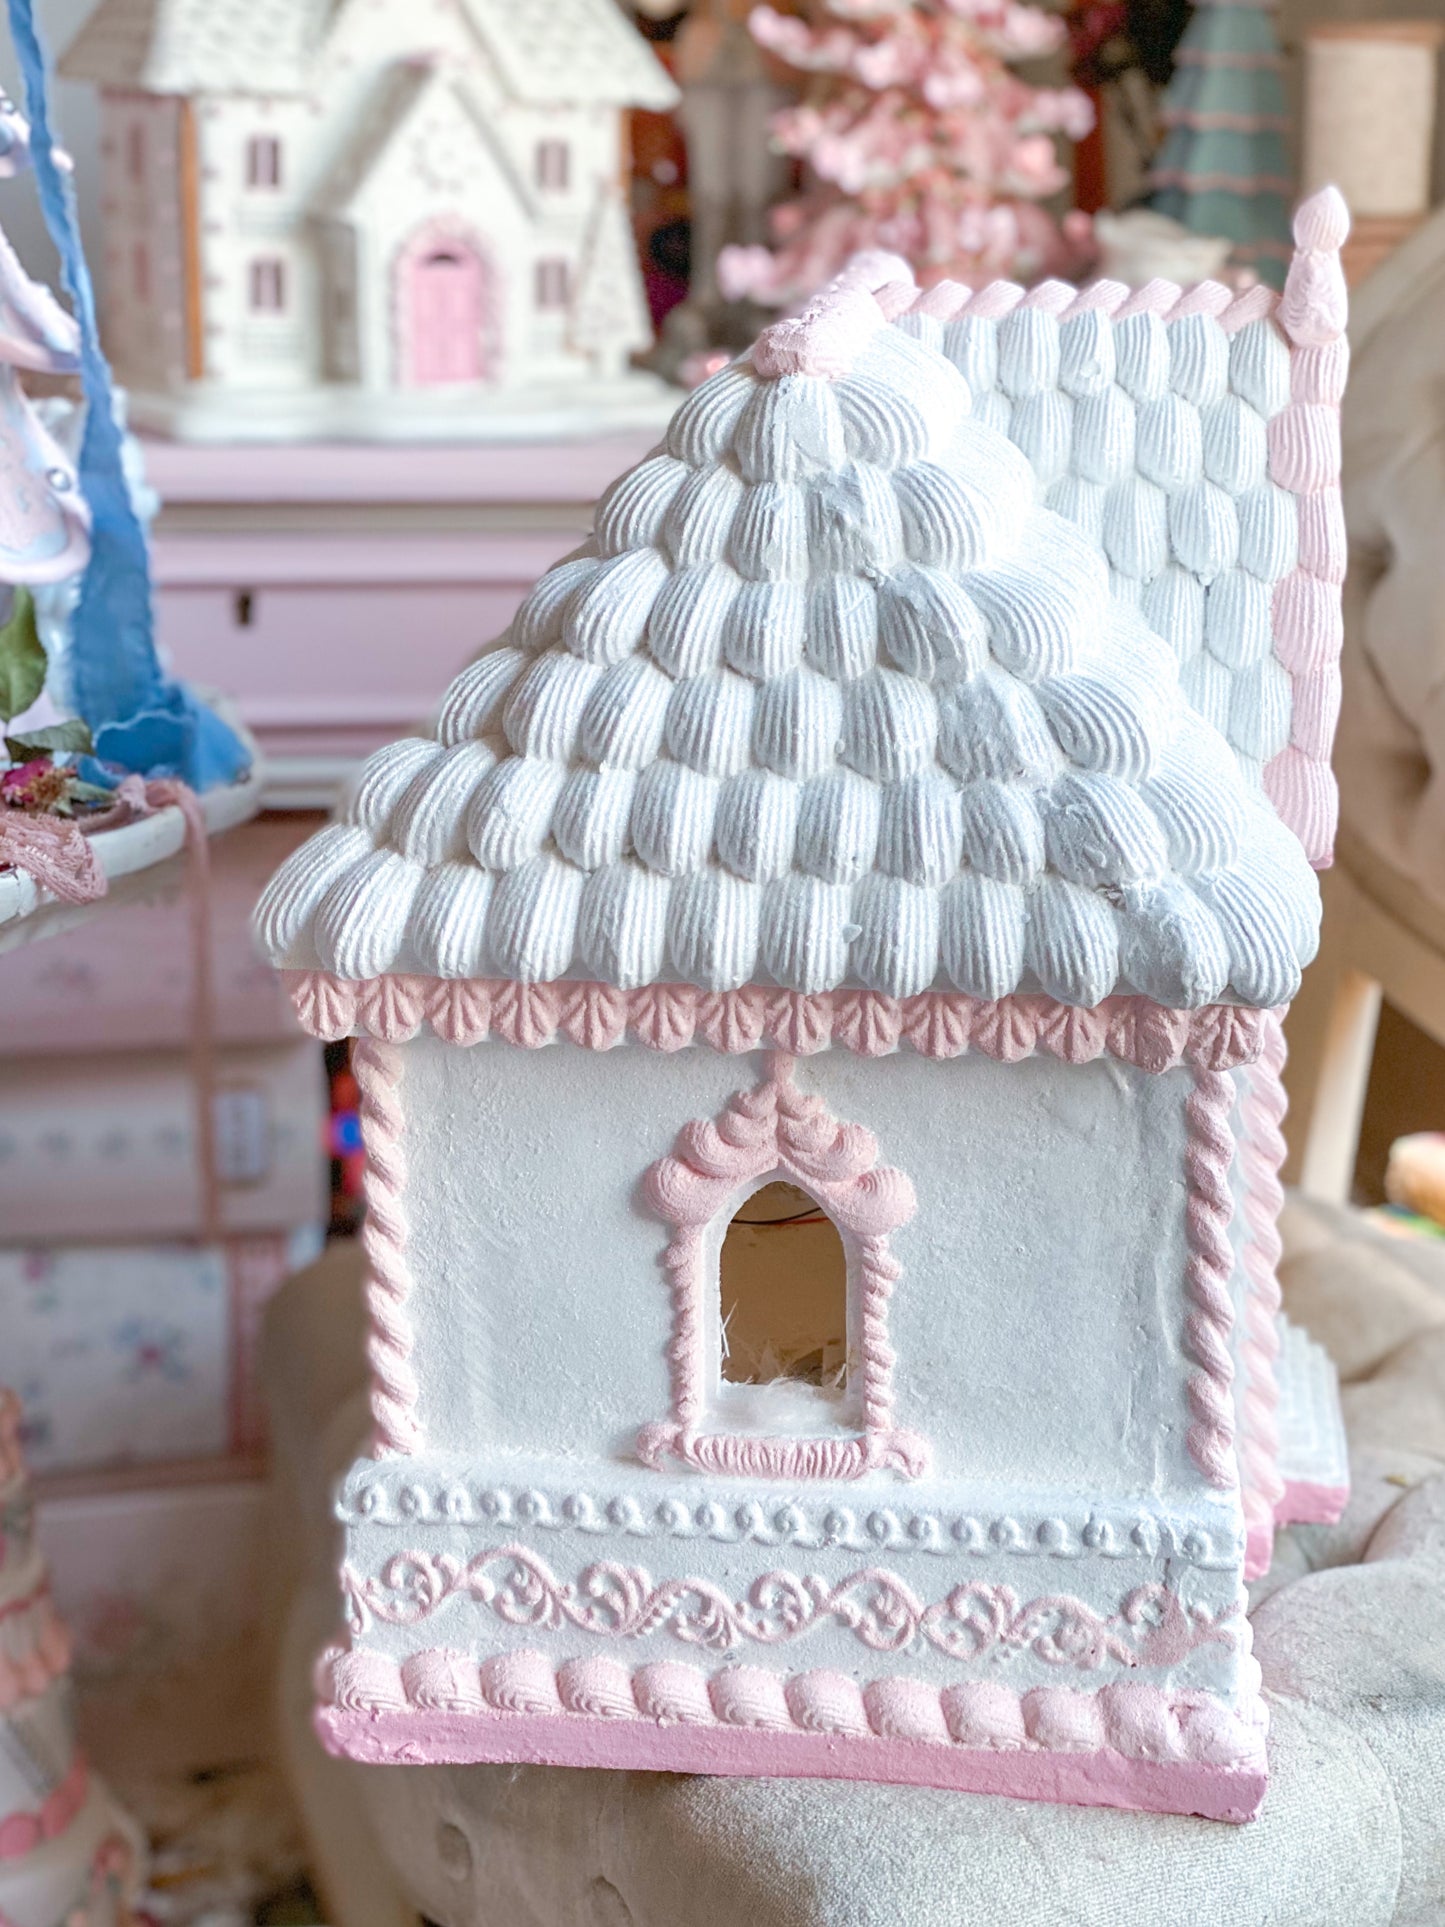 Bespoke Pink and White Hand Painted Large LED Light Up Gingerbread Cookie House